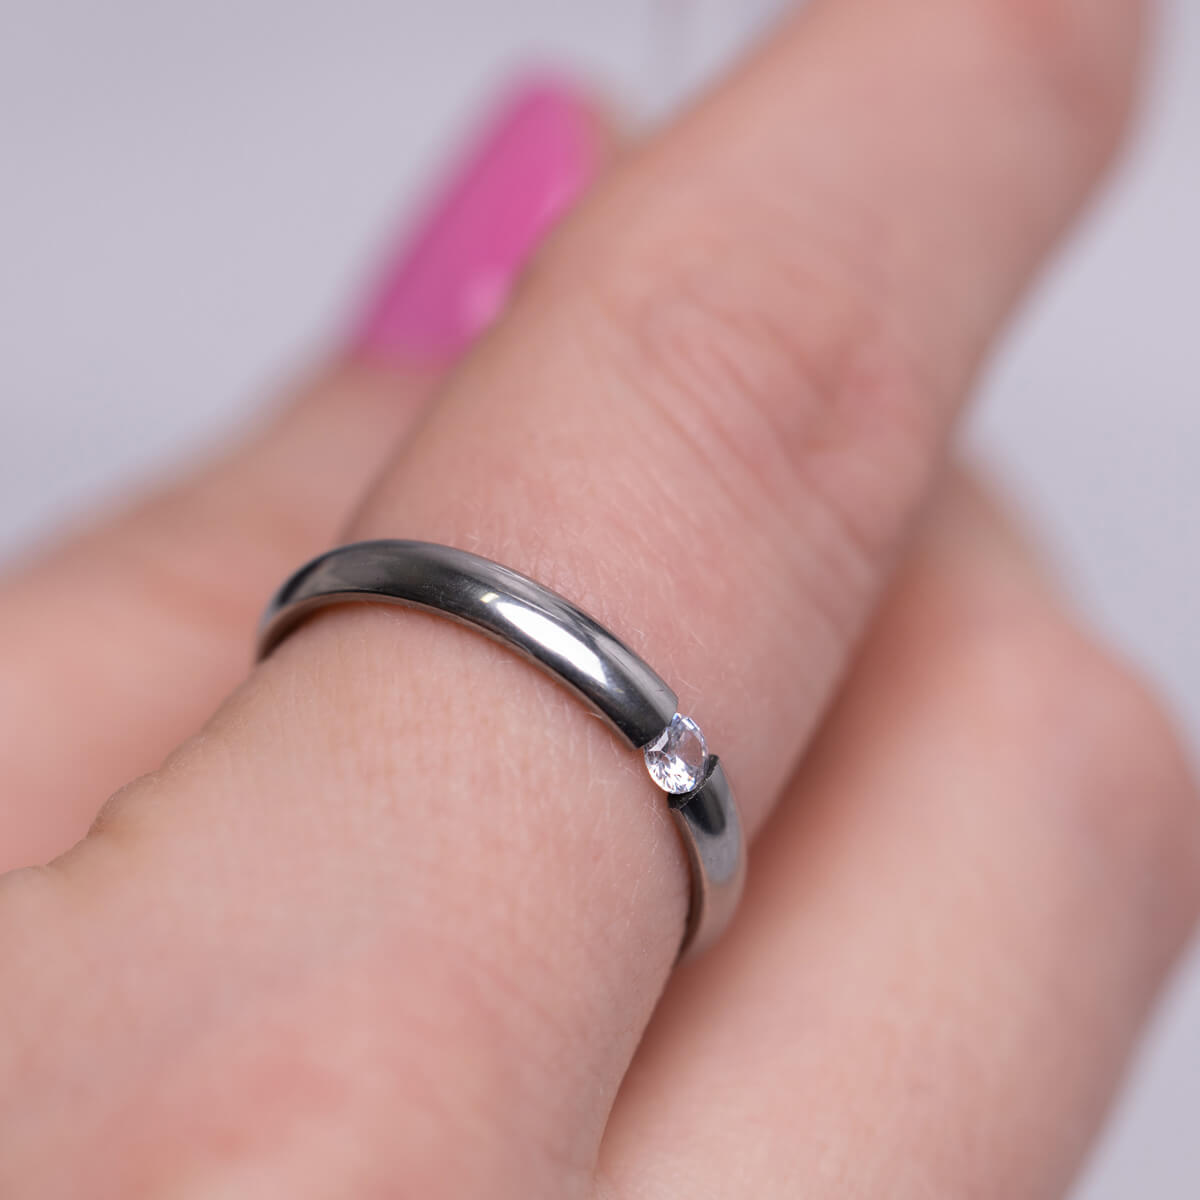 Narrow ring with zirconia stone 3mm (Steel 316L)